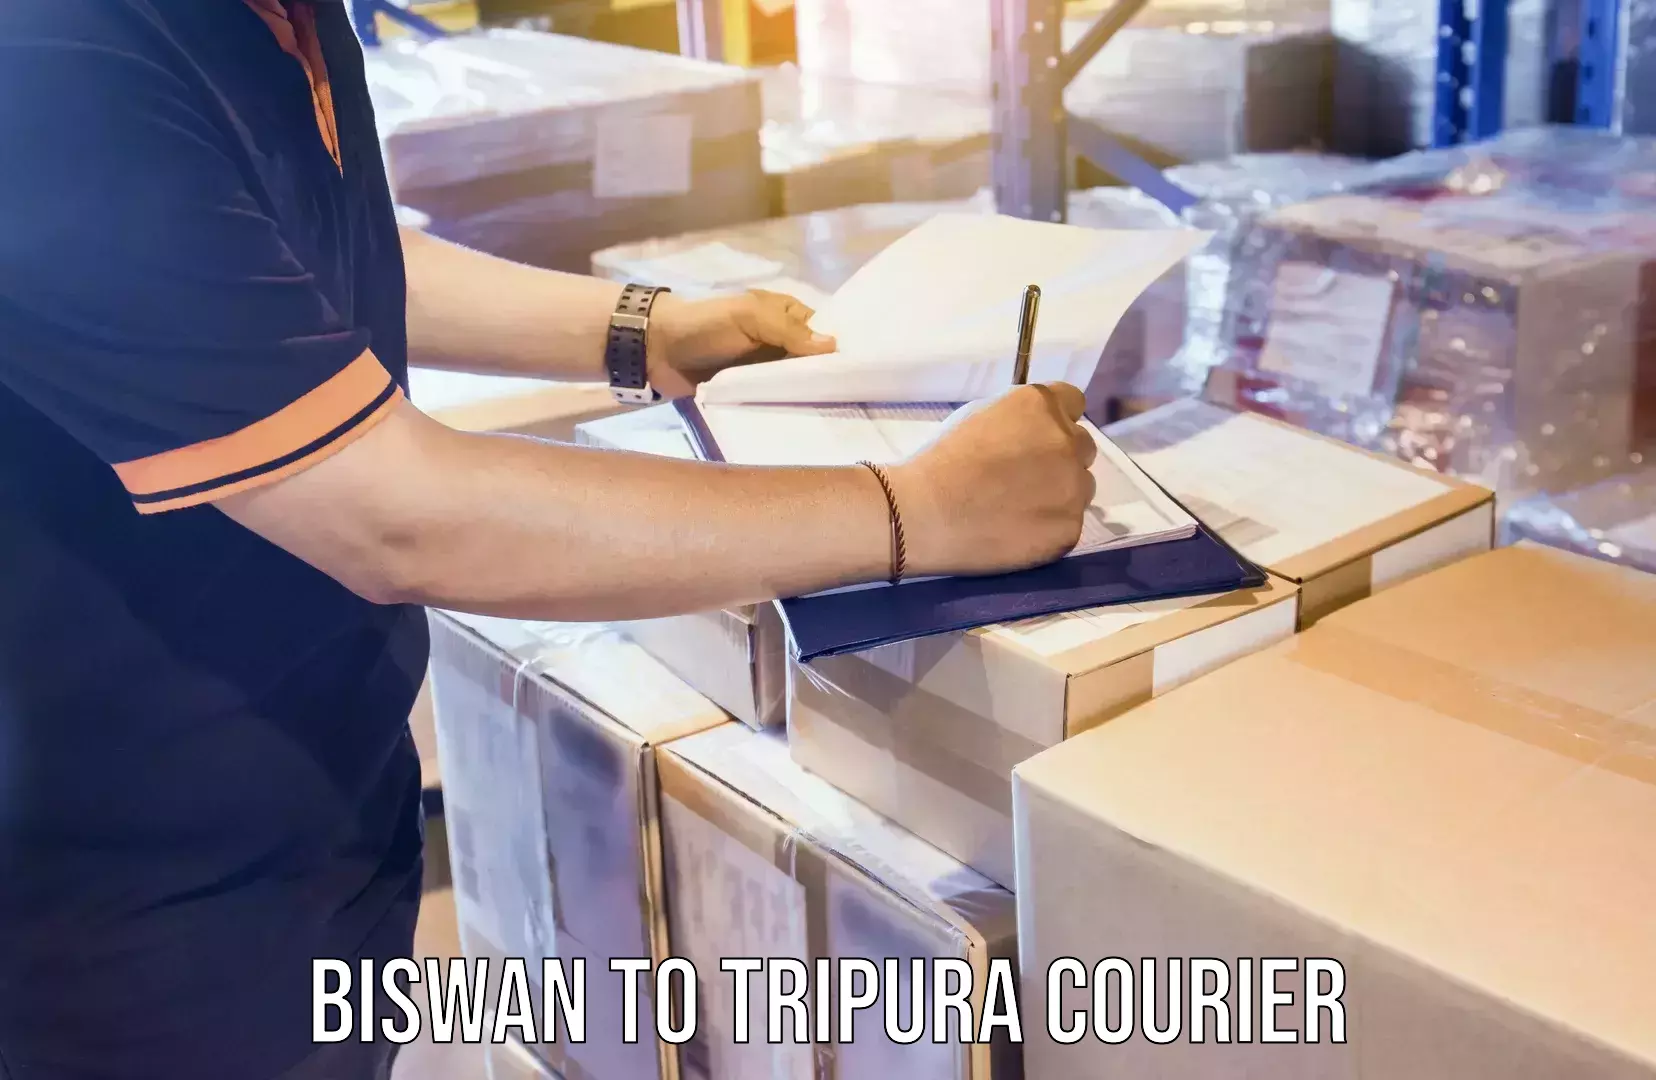 Customizable delivery plans Biswan to Udaipur Tripura